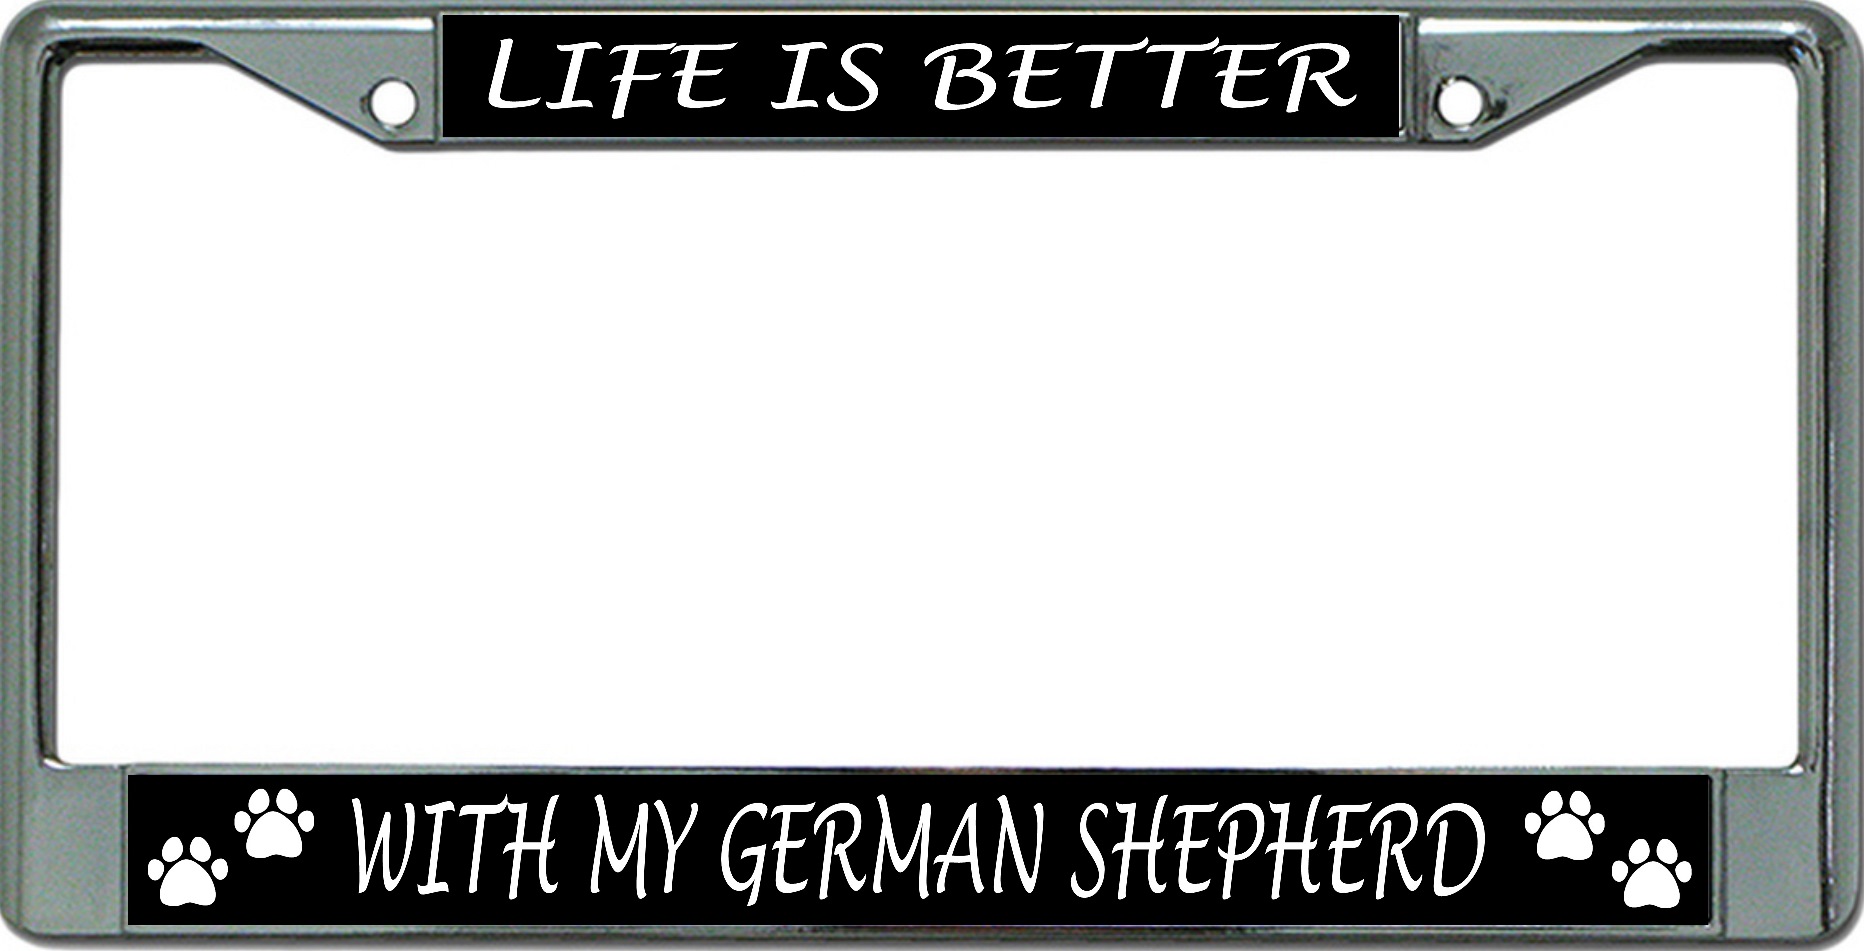 Life Is Better With My German Shepherd Chrome License Plate FRAME